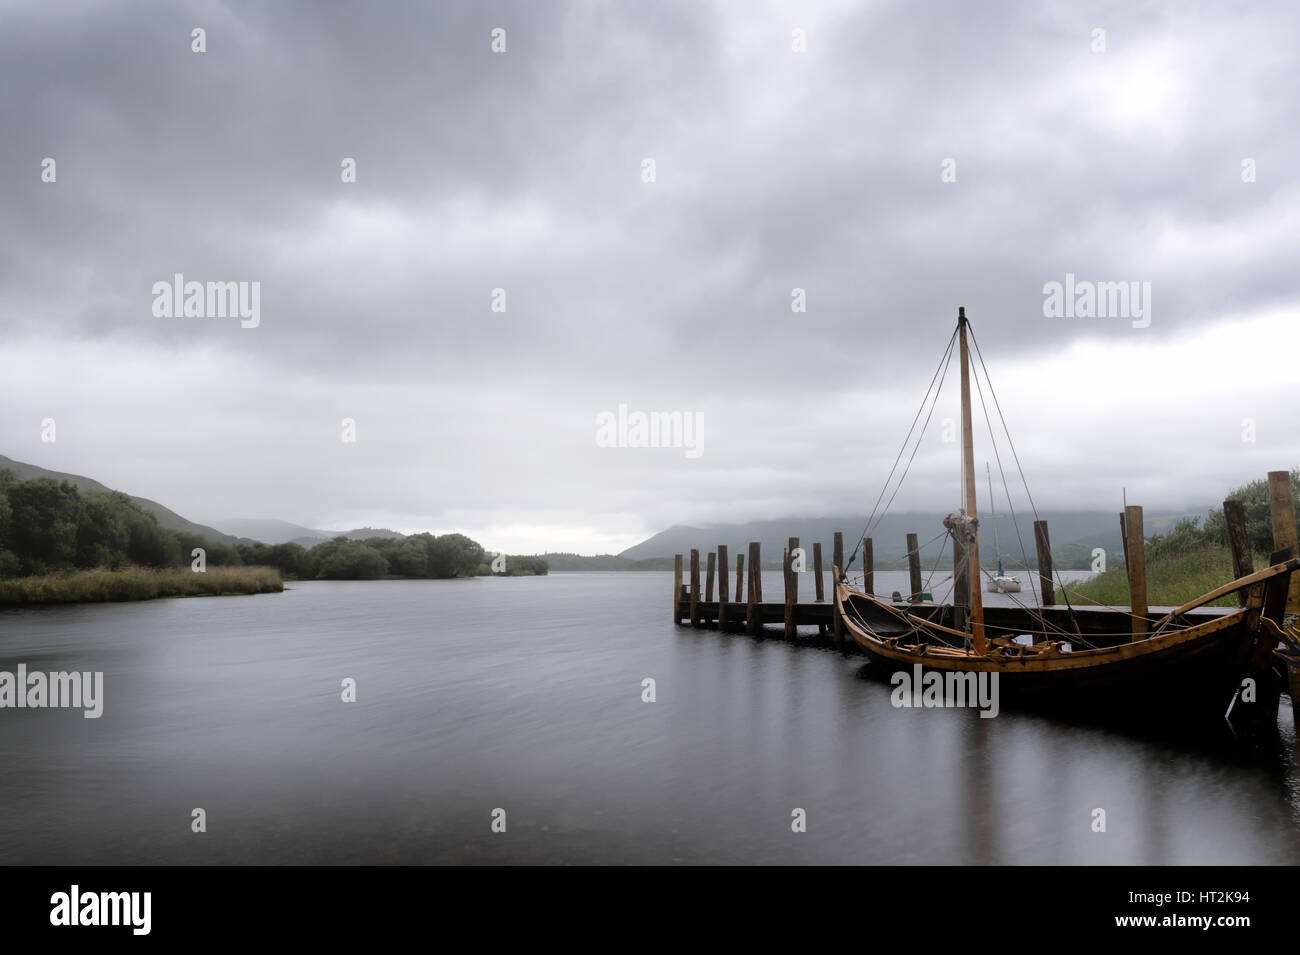 A cool cloudy morning at Derwent Water in the Lake District National Park, United Kingdom Stock Photo